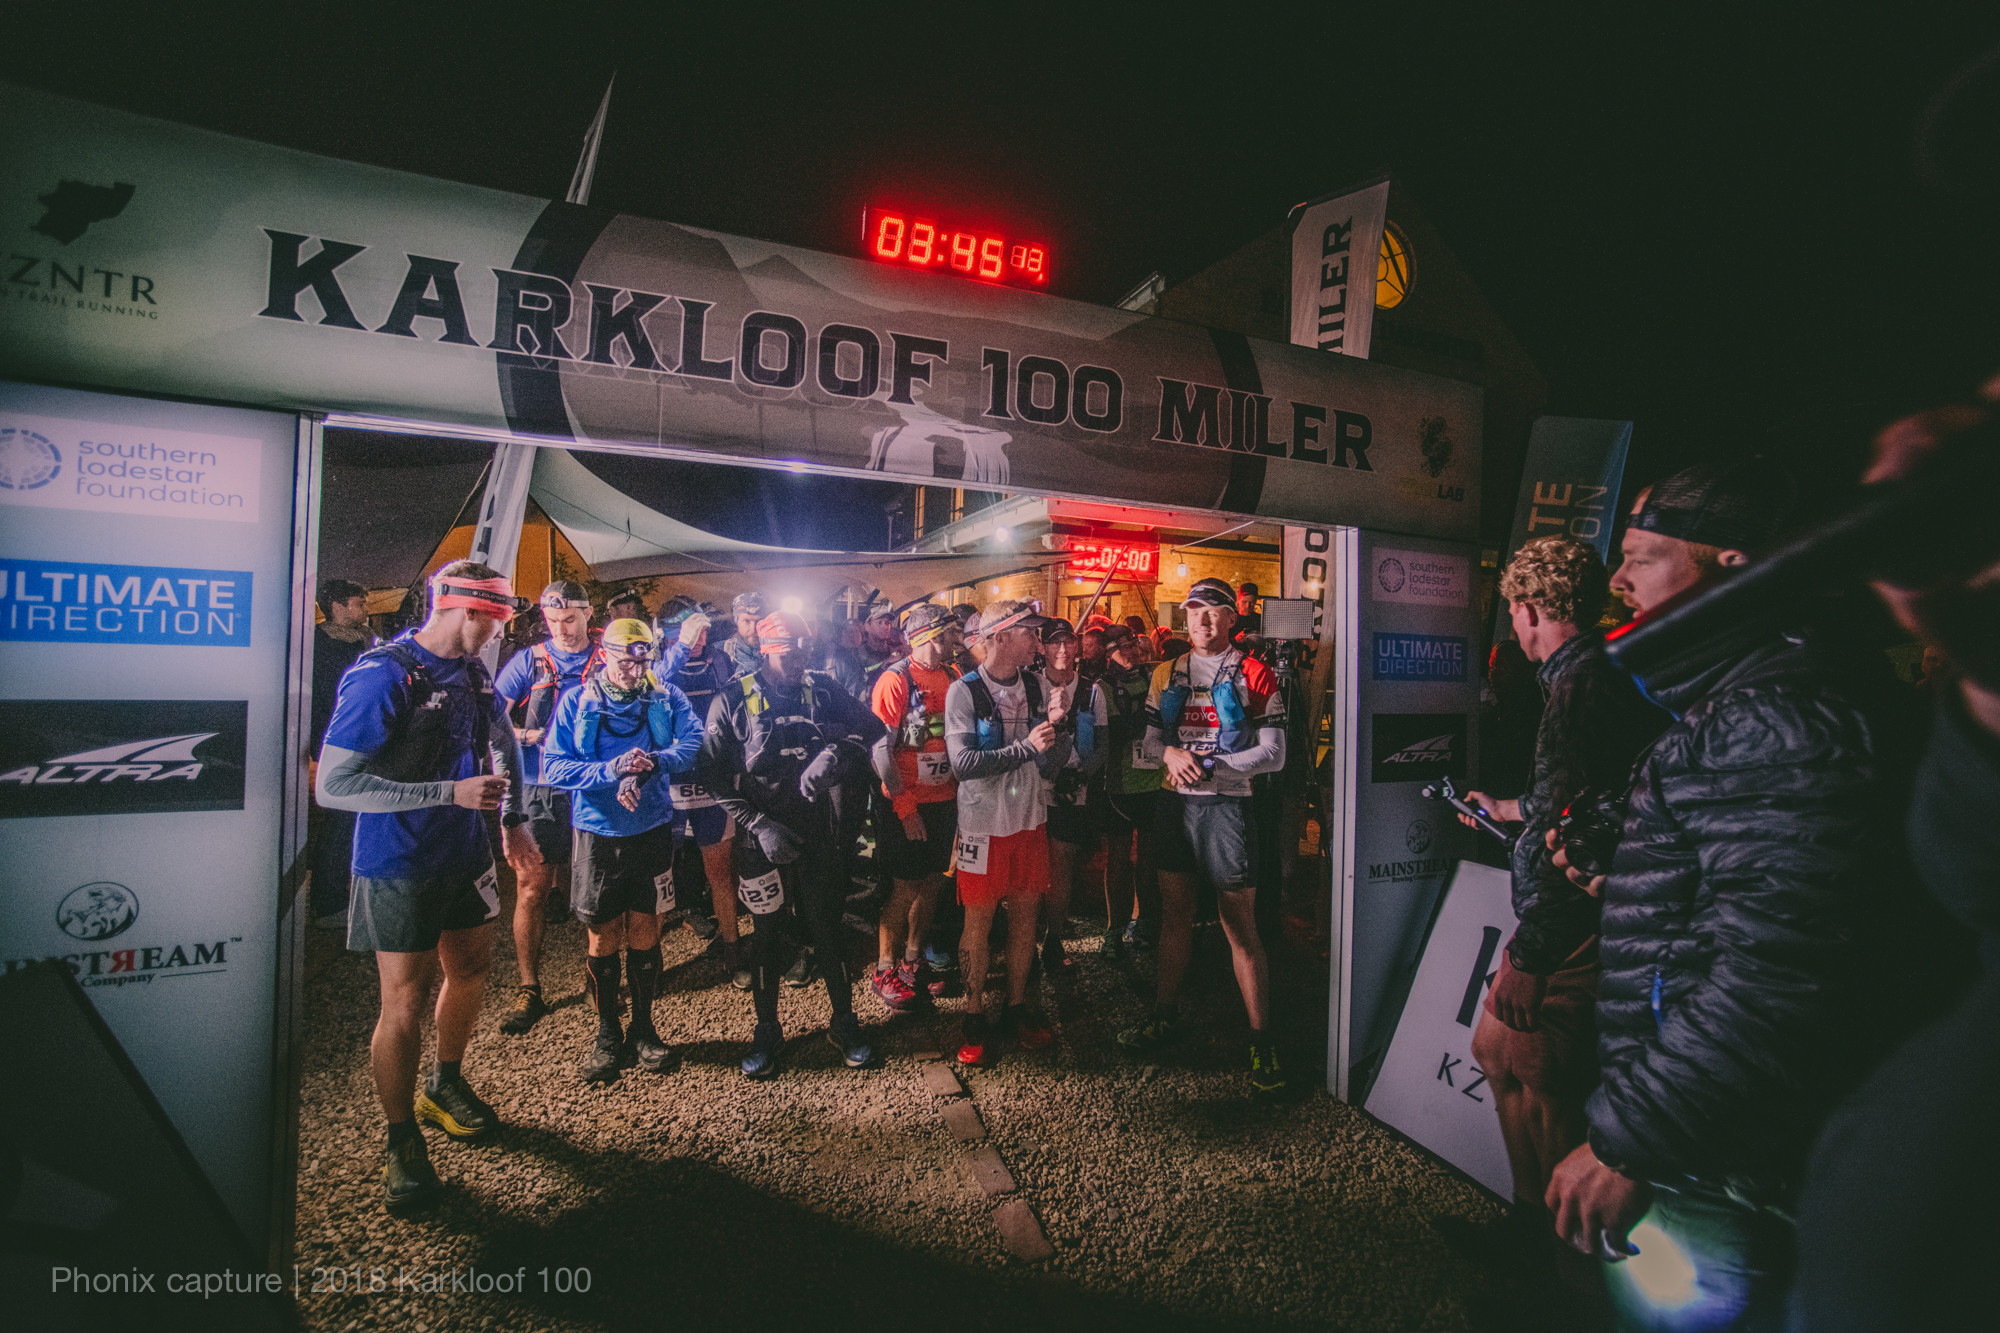 South African's Karkloof 100 miler has been selected as a qualifying race for Western States 2020